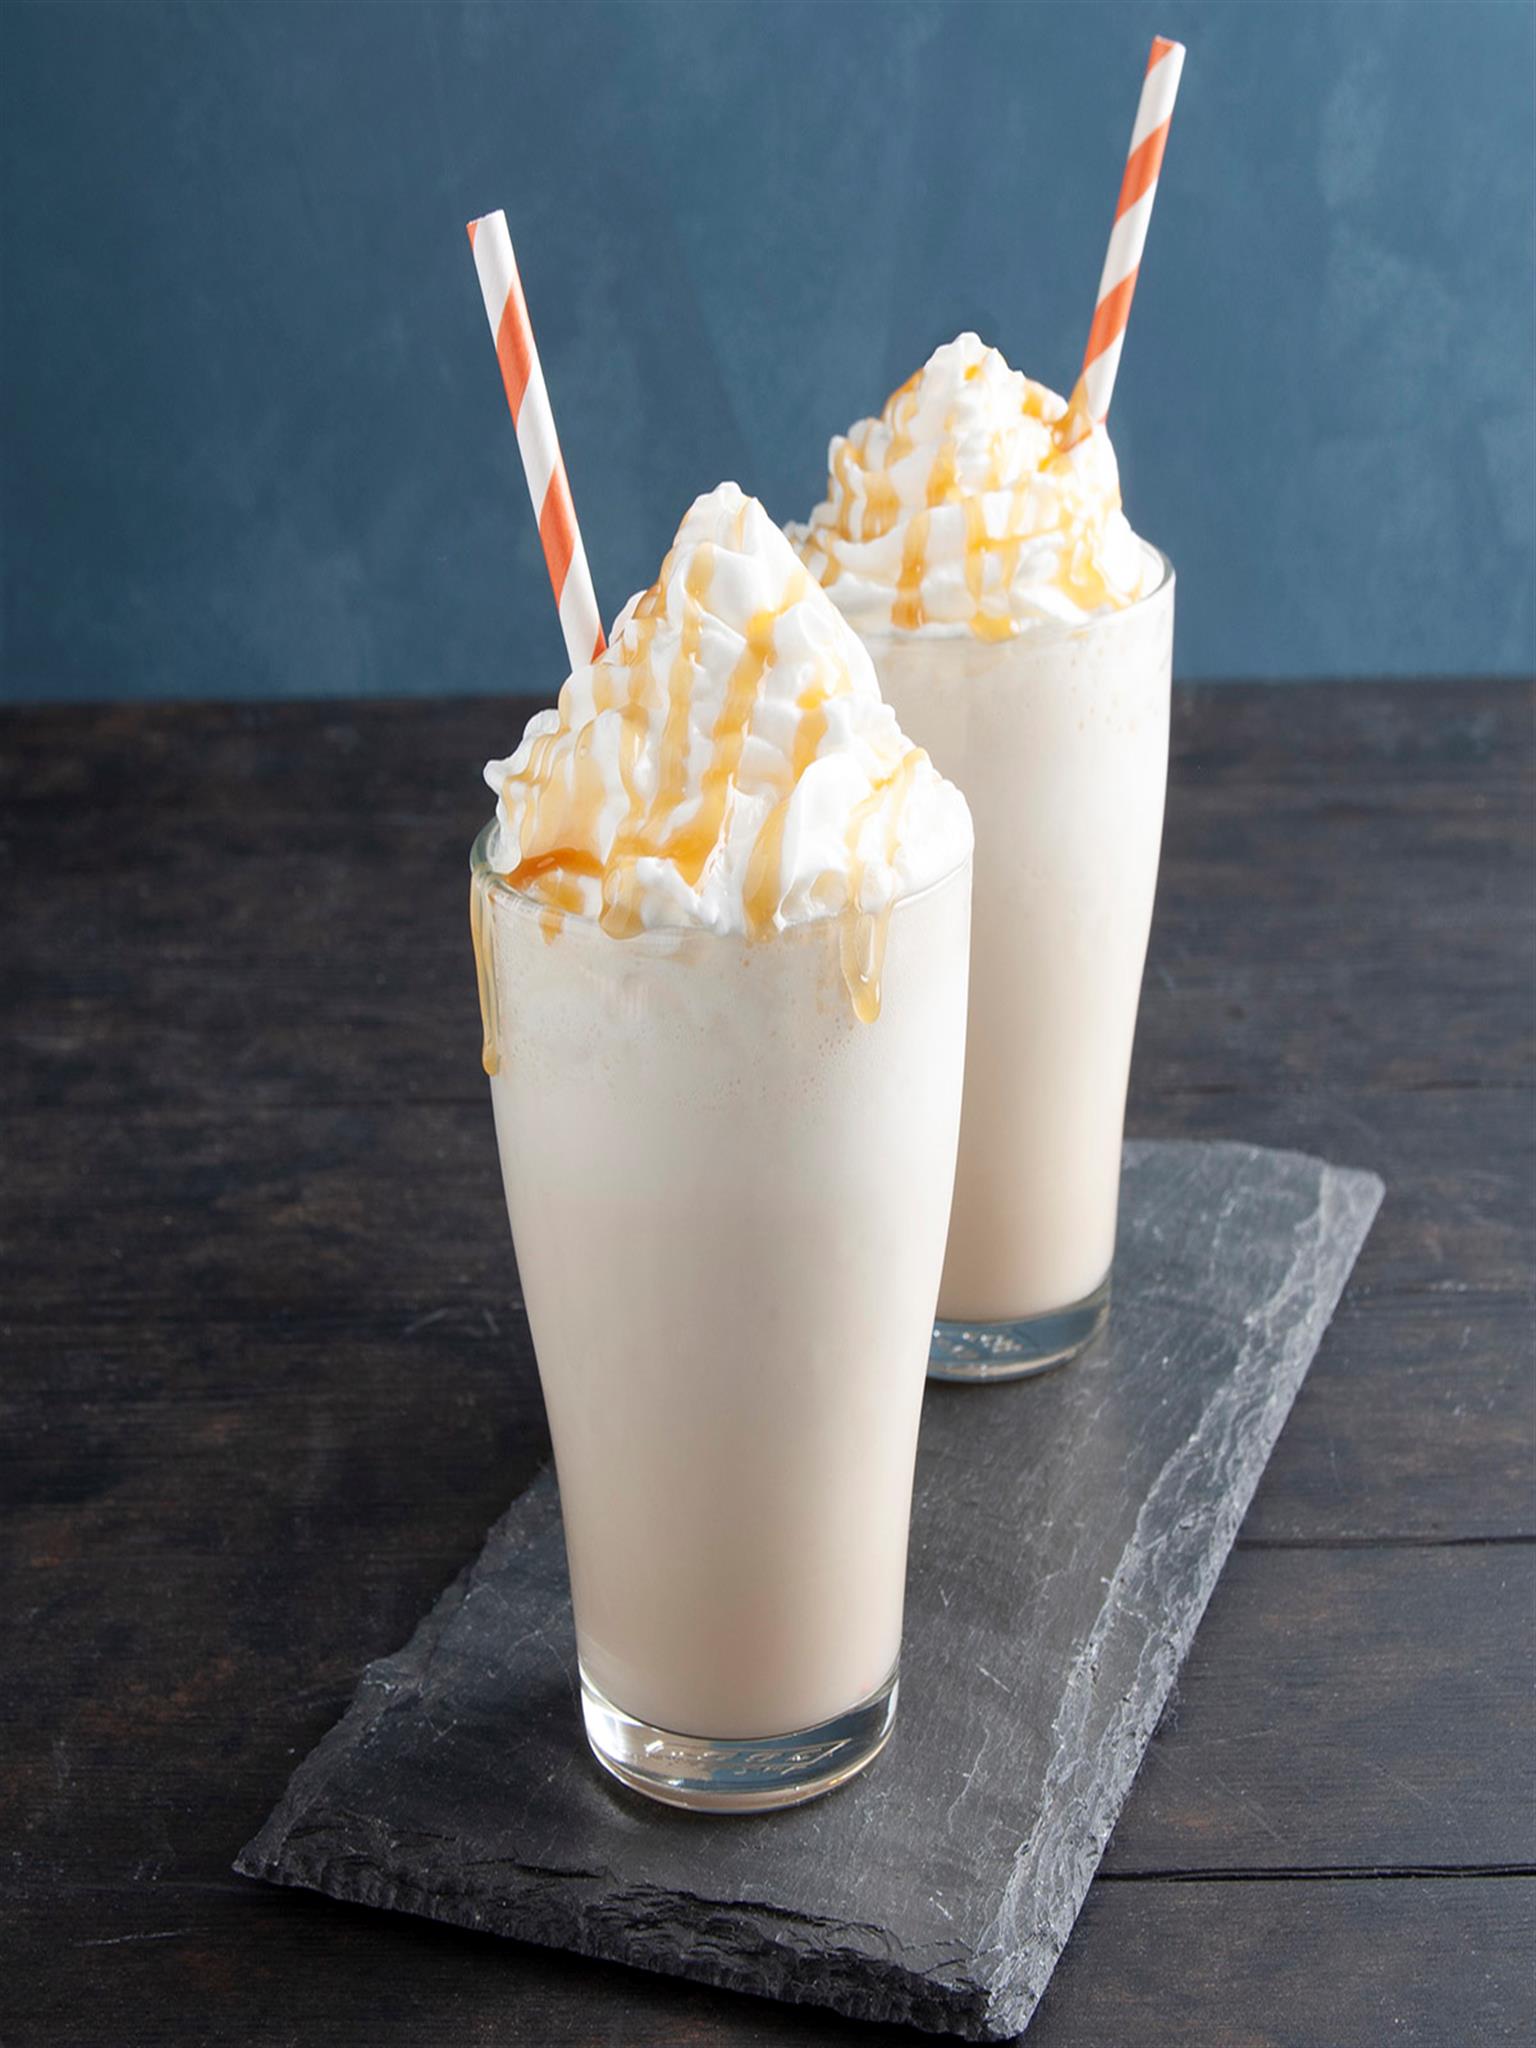 Caramel Frappuccino Recipe: How to Make It